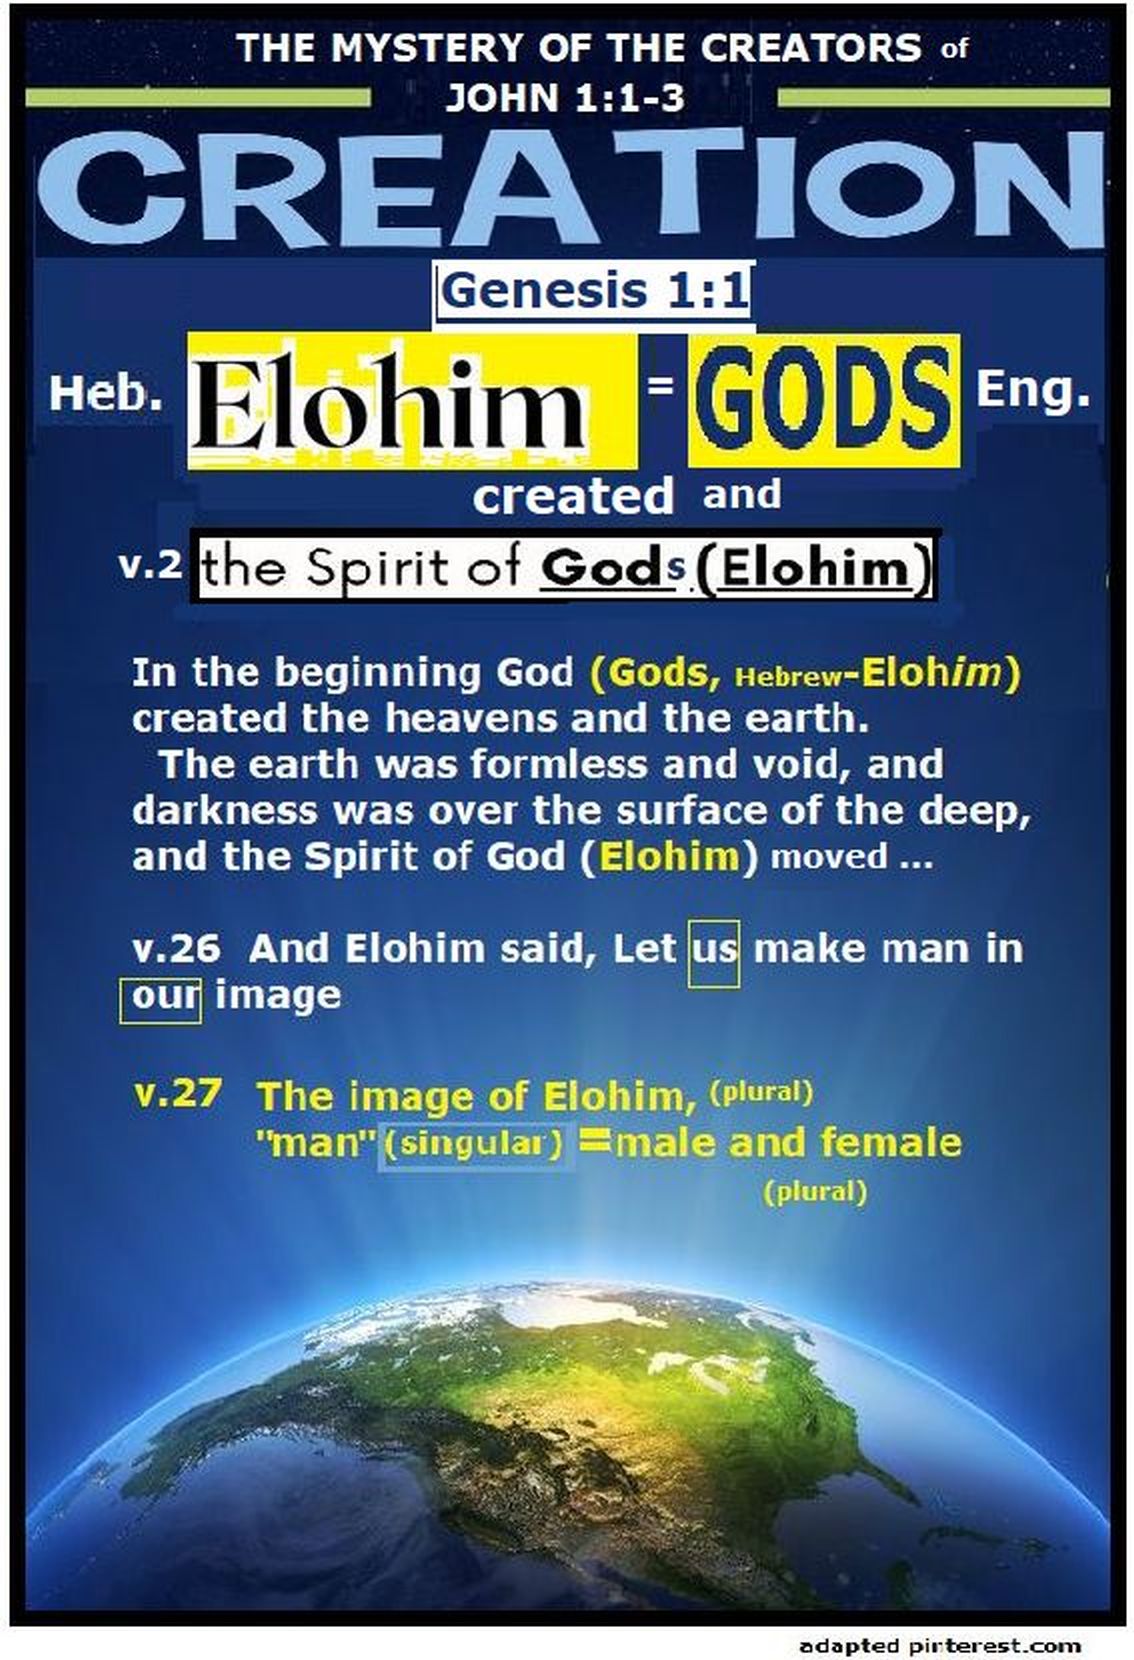 chart of Genesis 1 and elohim, plural of gods